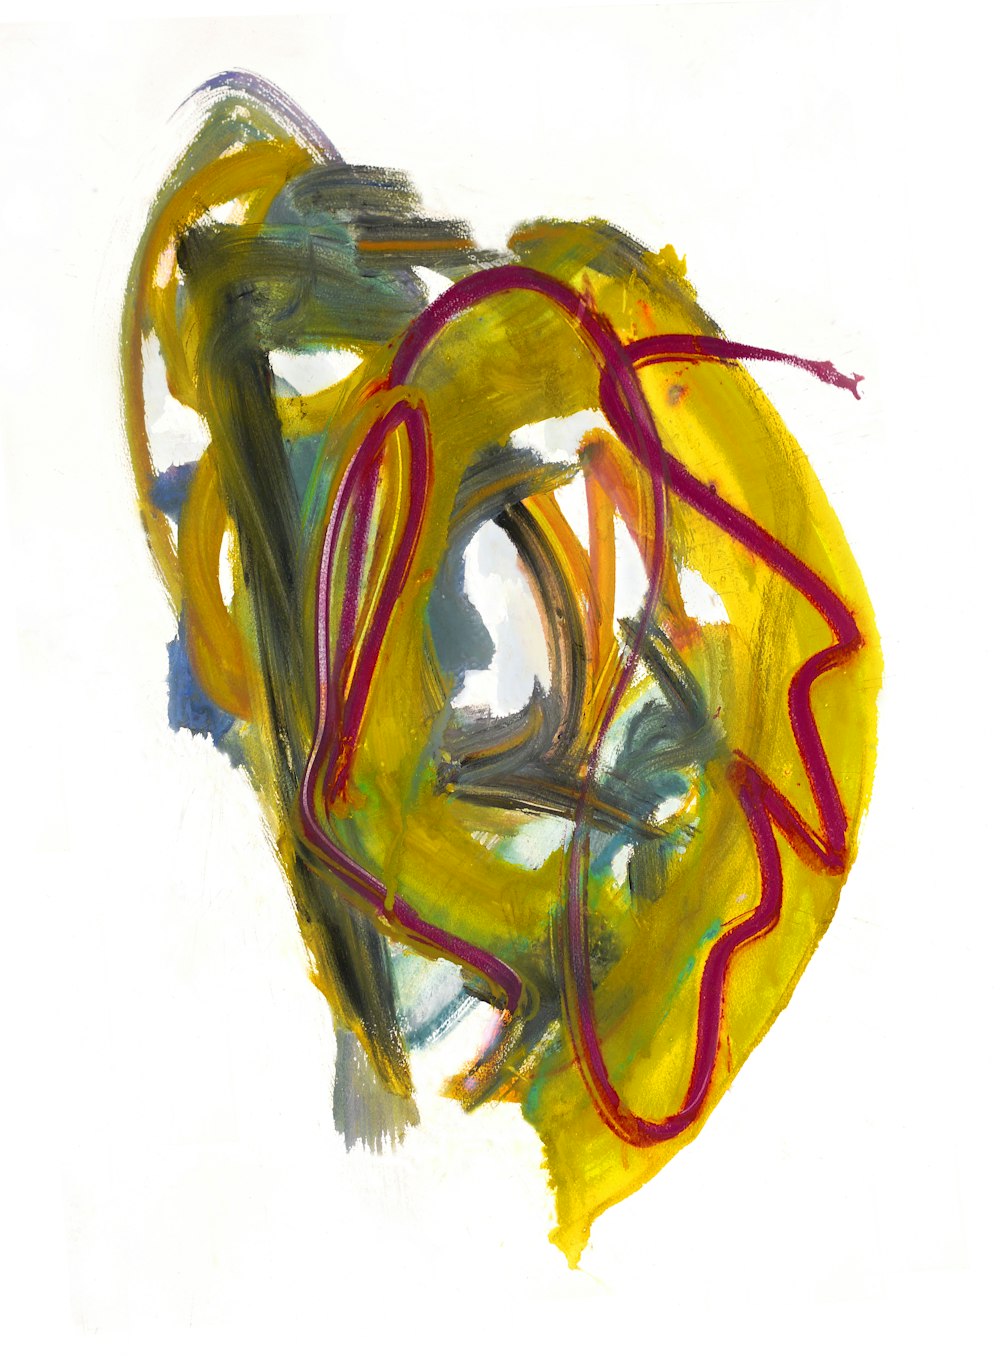 a painting of a yellow and red object